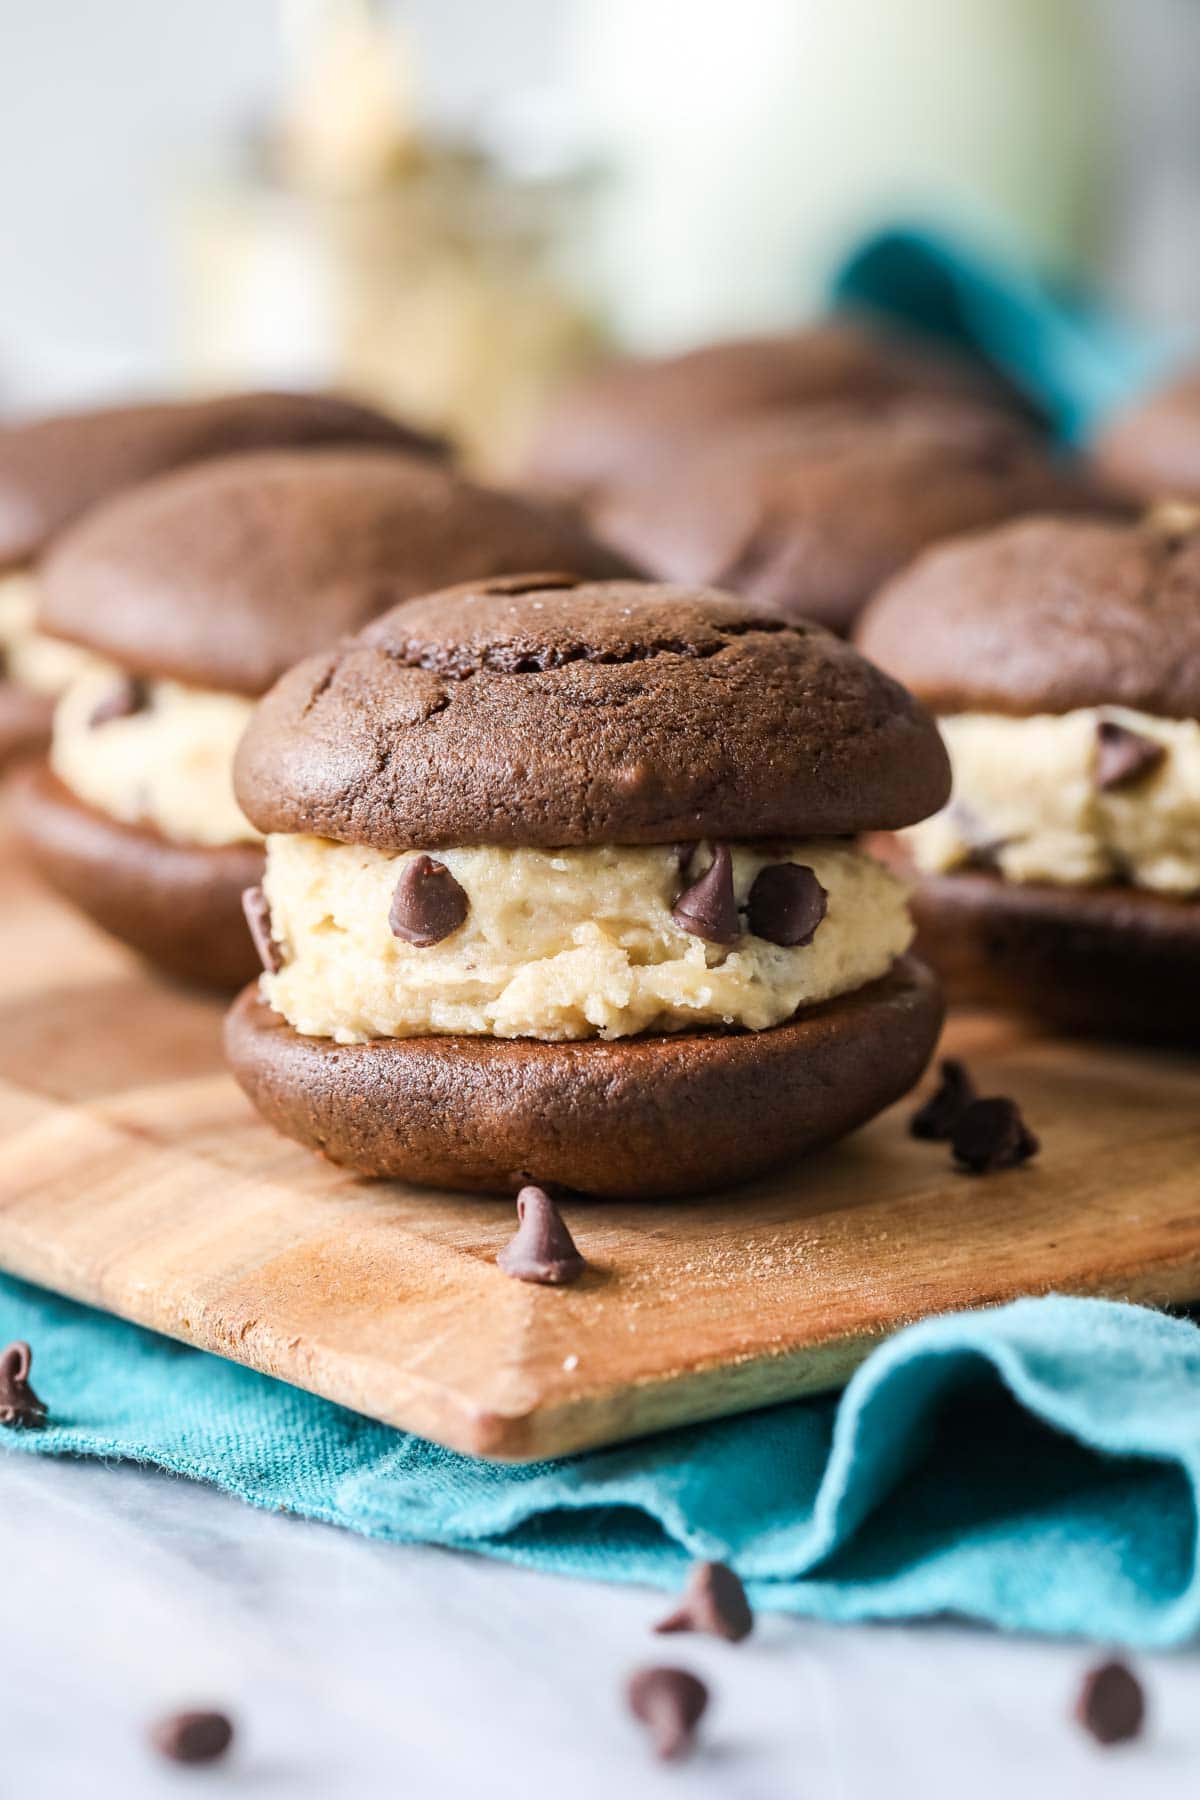 Close-up view of chocolate whoopie pies with a cookie dough filling on a wood cutting board.